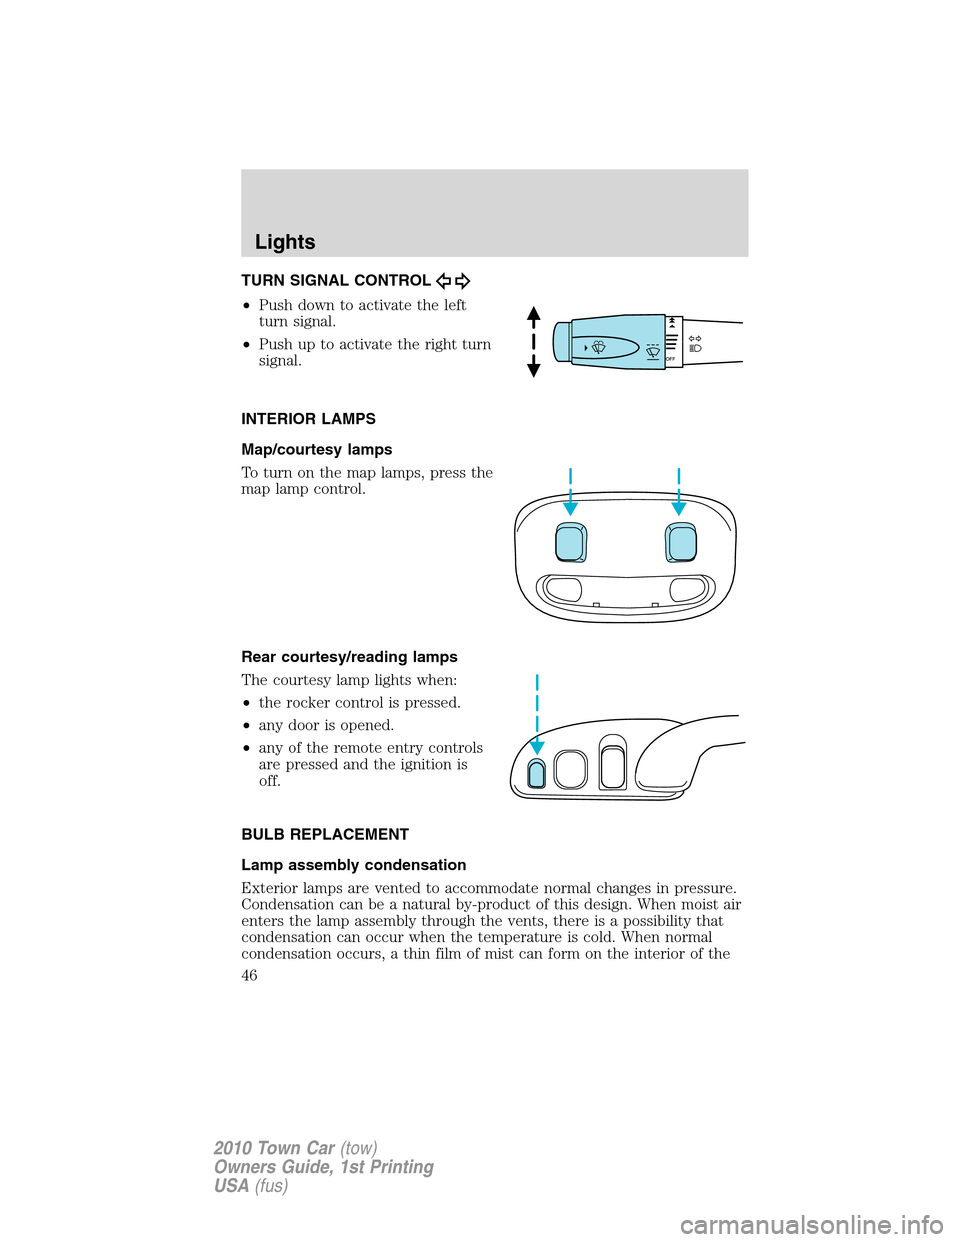 LINCOLN TOWN CAR 2010 Service Manual TURN SIGNAL CONTROL
•Push down to activate the left
turn signal.
•Push up to activate the right turn
signal.
INTERIOR LAMPS
Map/courtesy lamps
To turn on the map lamps, press the
map lamp control.